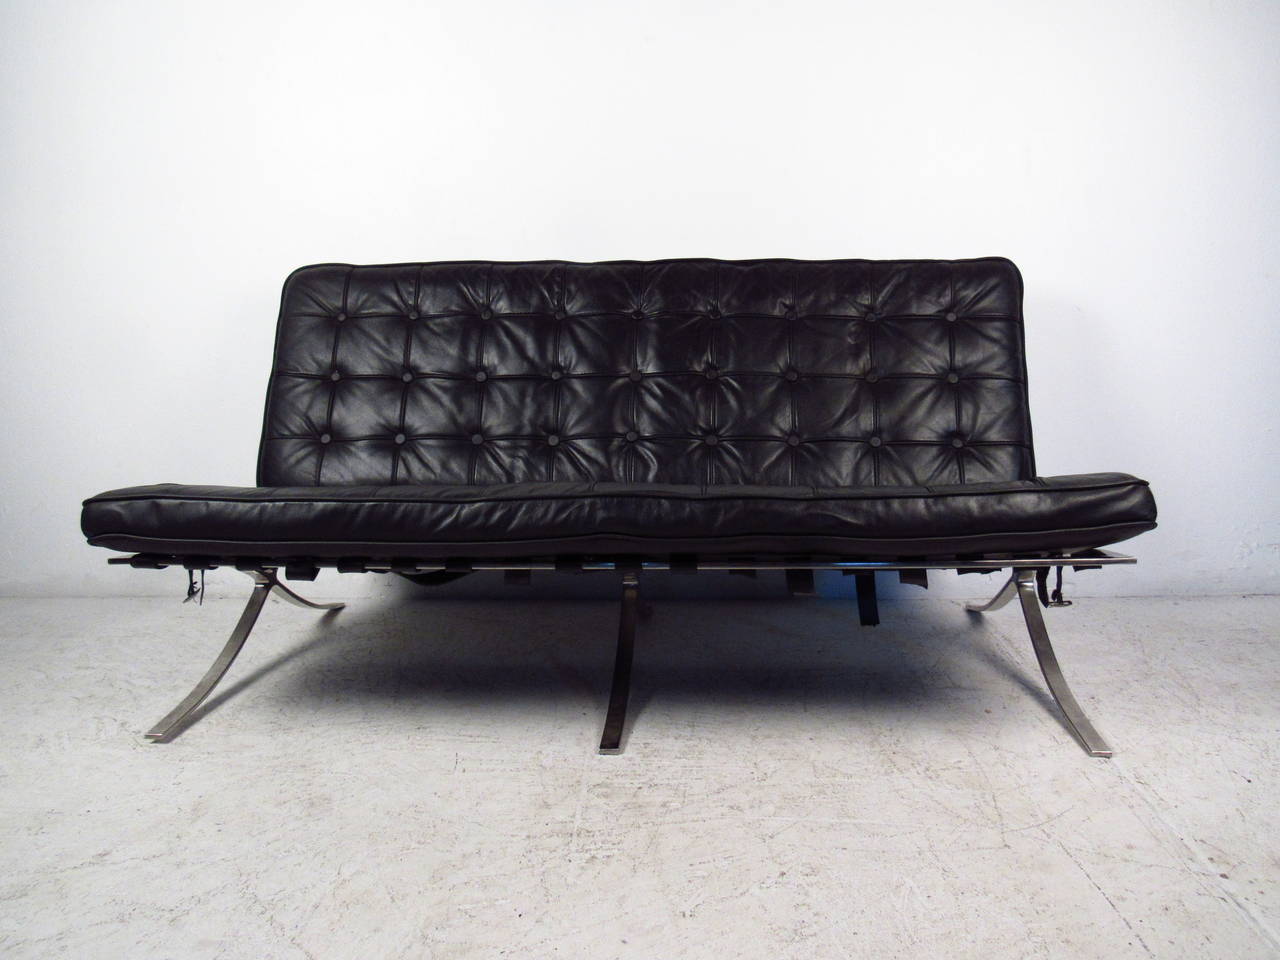 This beautiful sofa features wonderful tufted upholstery and a sturdy chrome frame. This classic mid-century design makes a stylish and comfortable addition to any interior. Please confirm item location (NY or NJ).